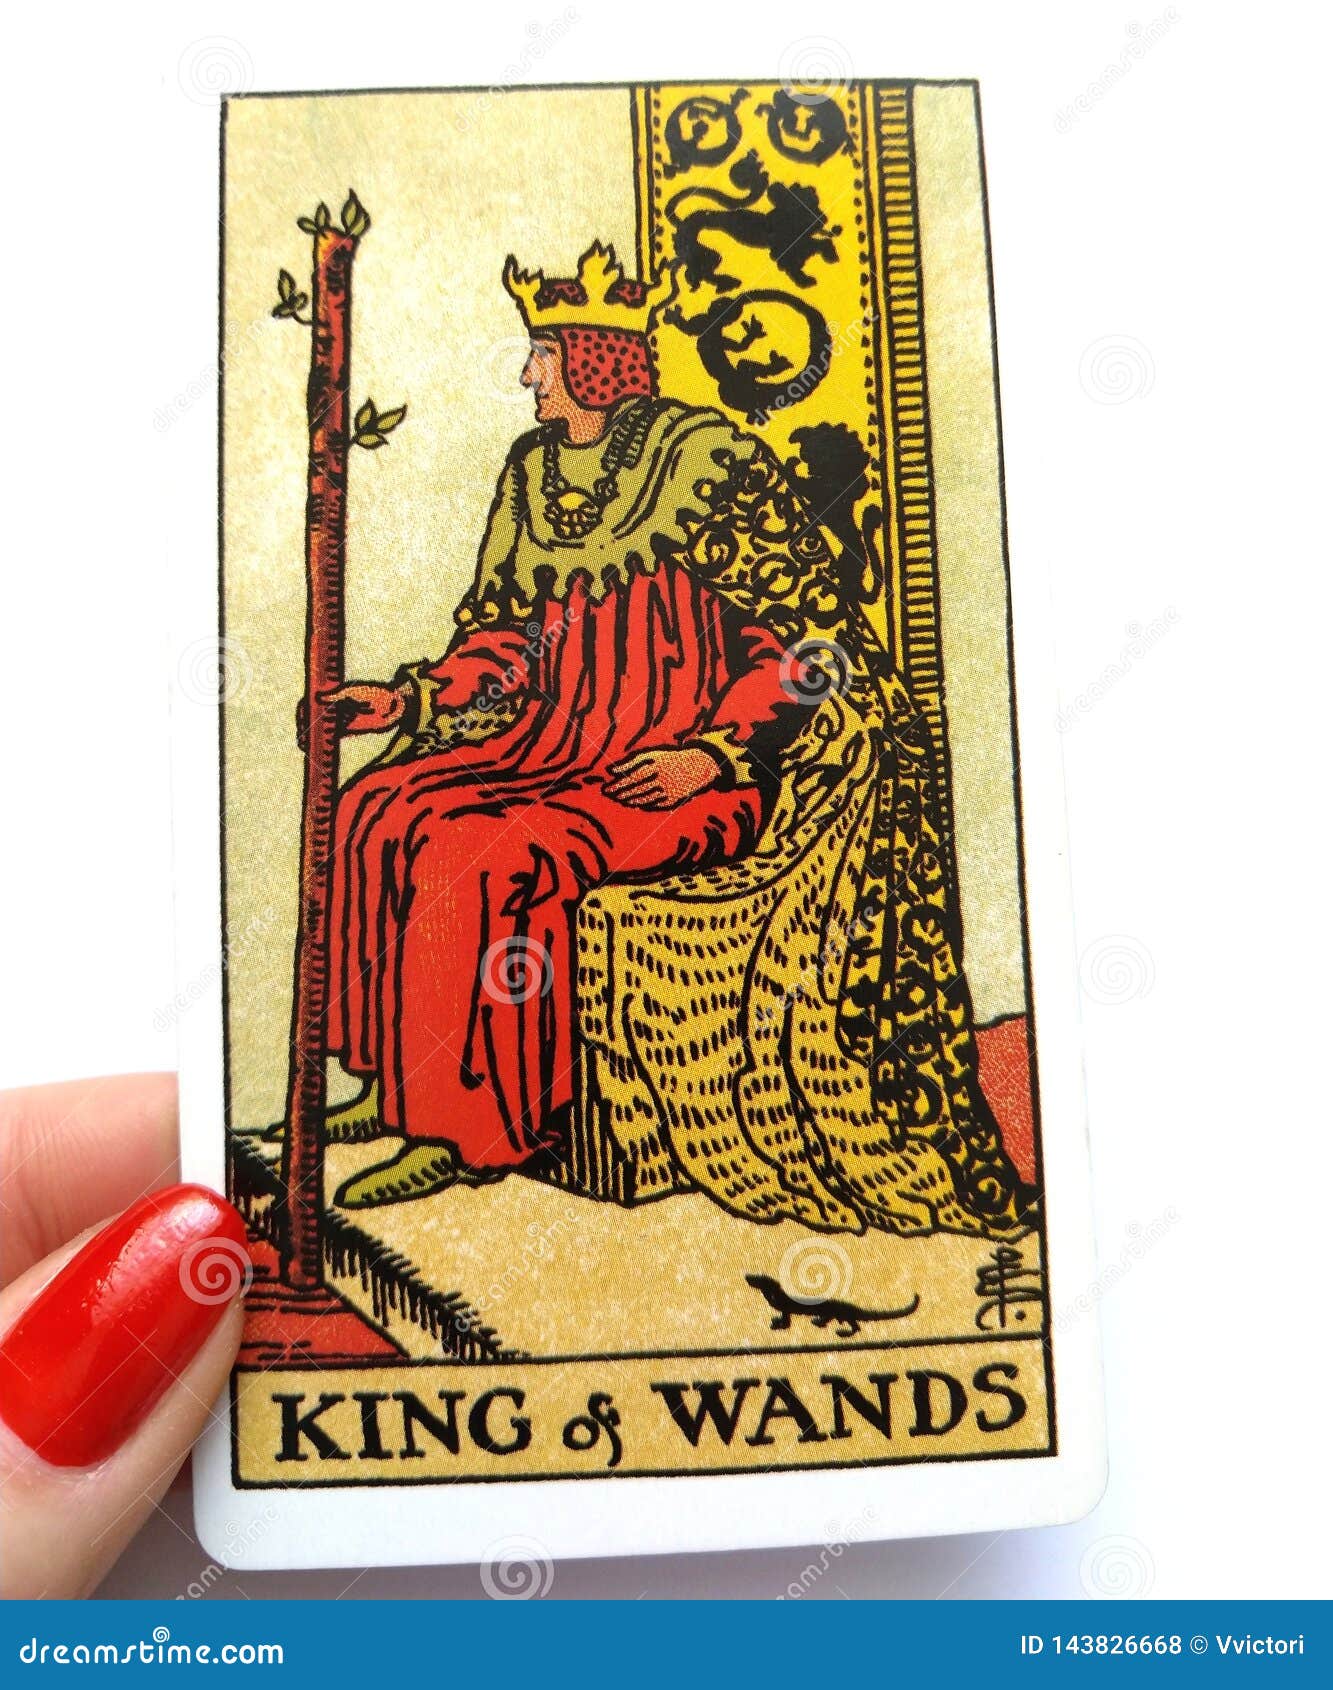 King Wands Card Dynamic Powerful Strong Leader Ruler Boss Director Experienced Mentor Role-Model Stock Photo - Image of background, divination: 143826668